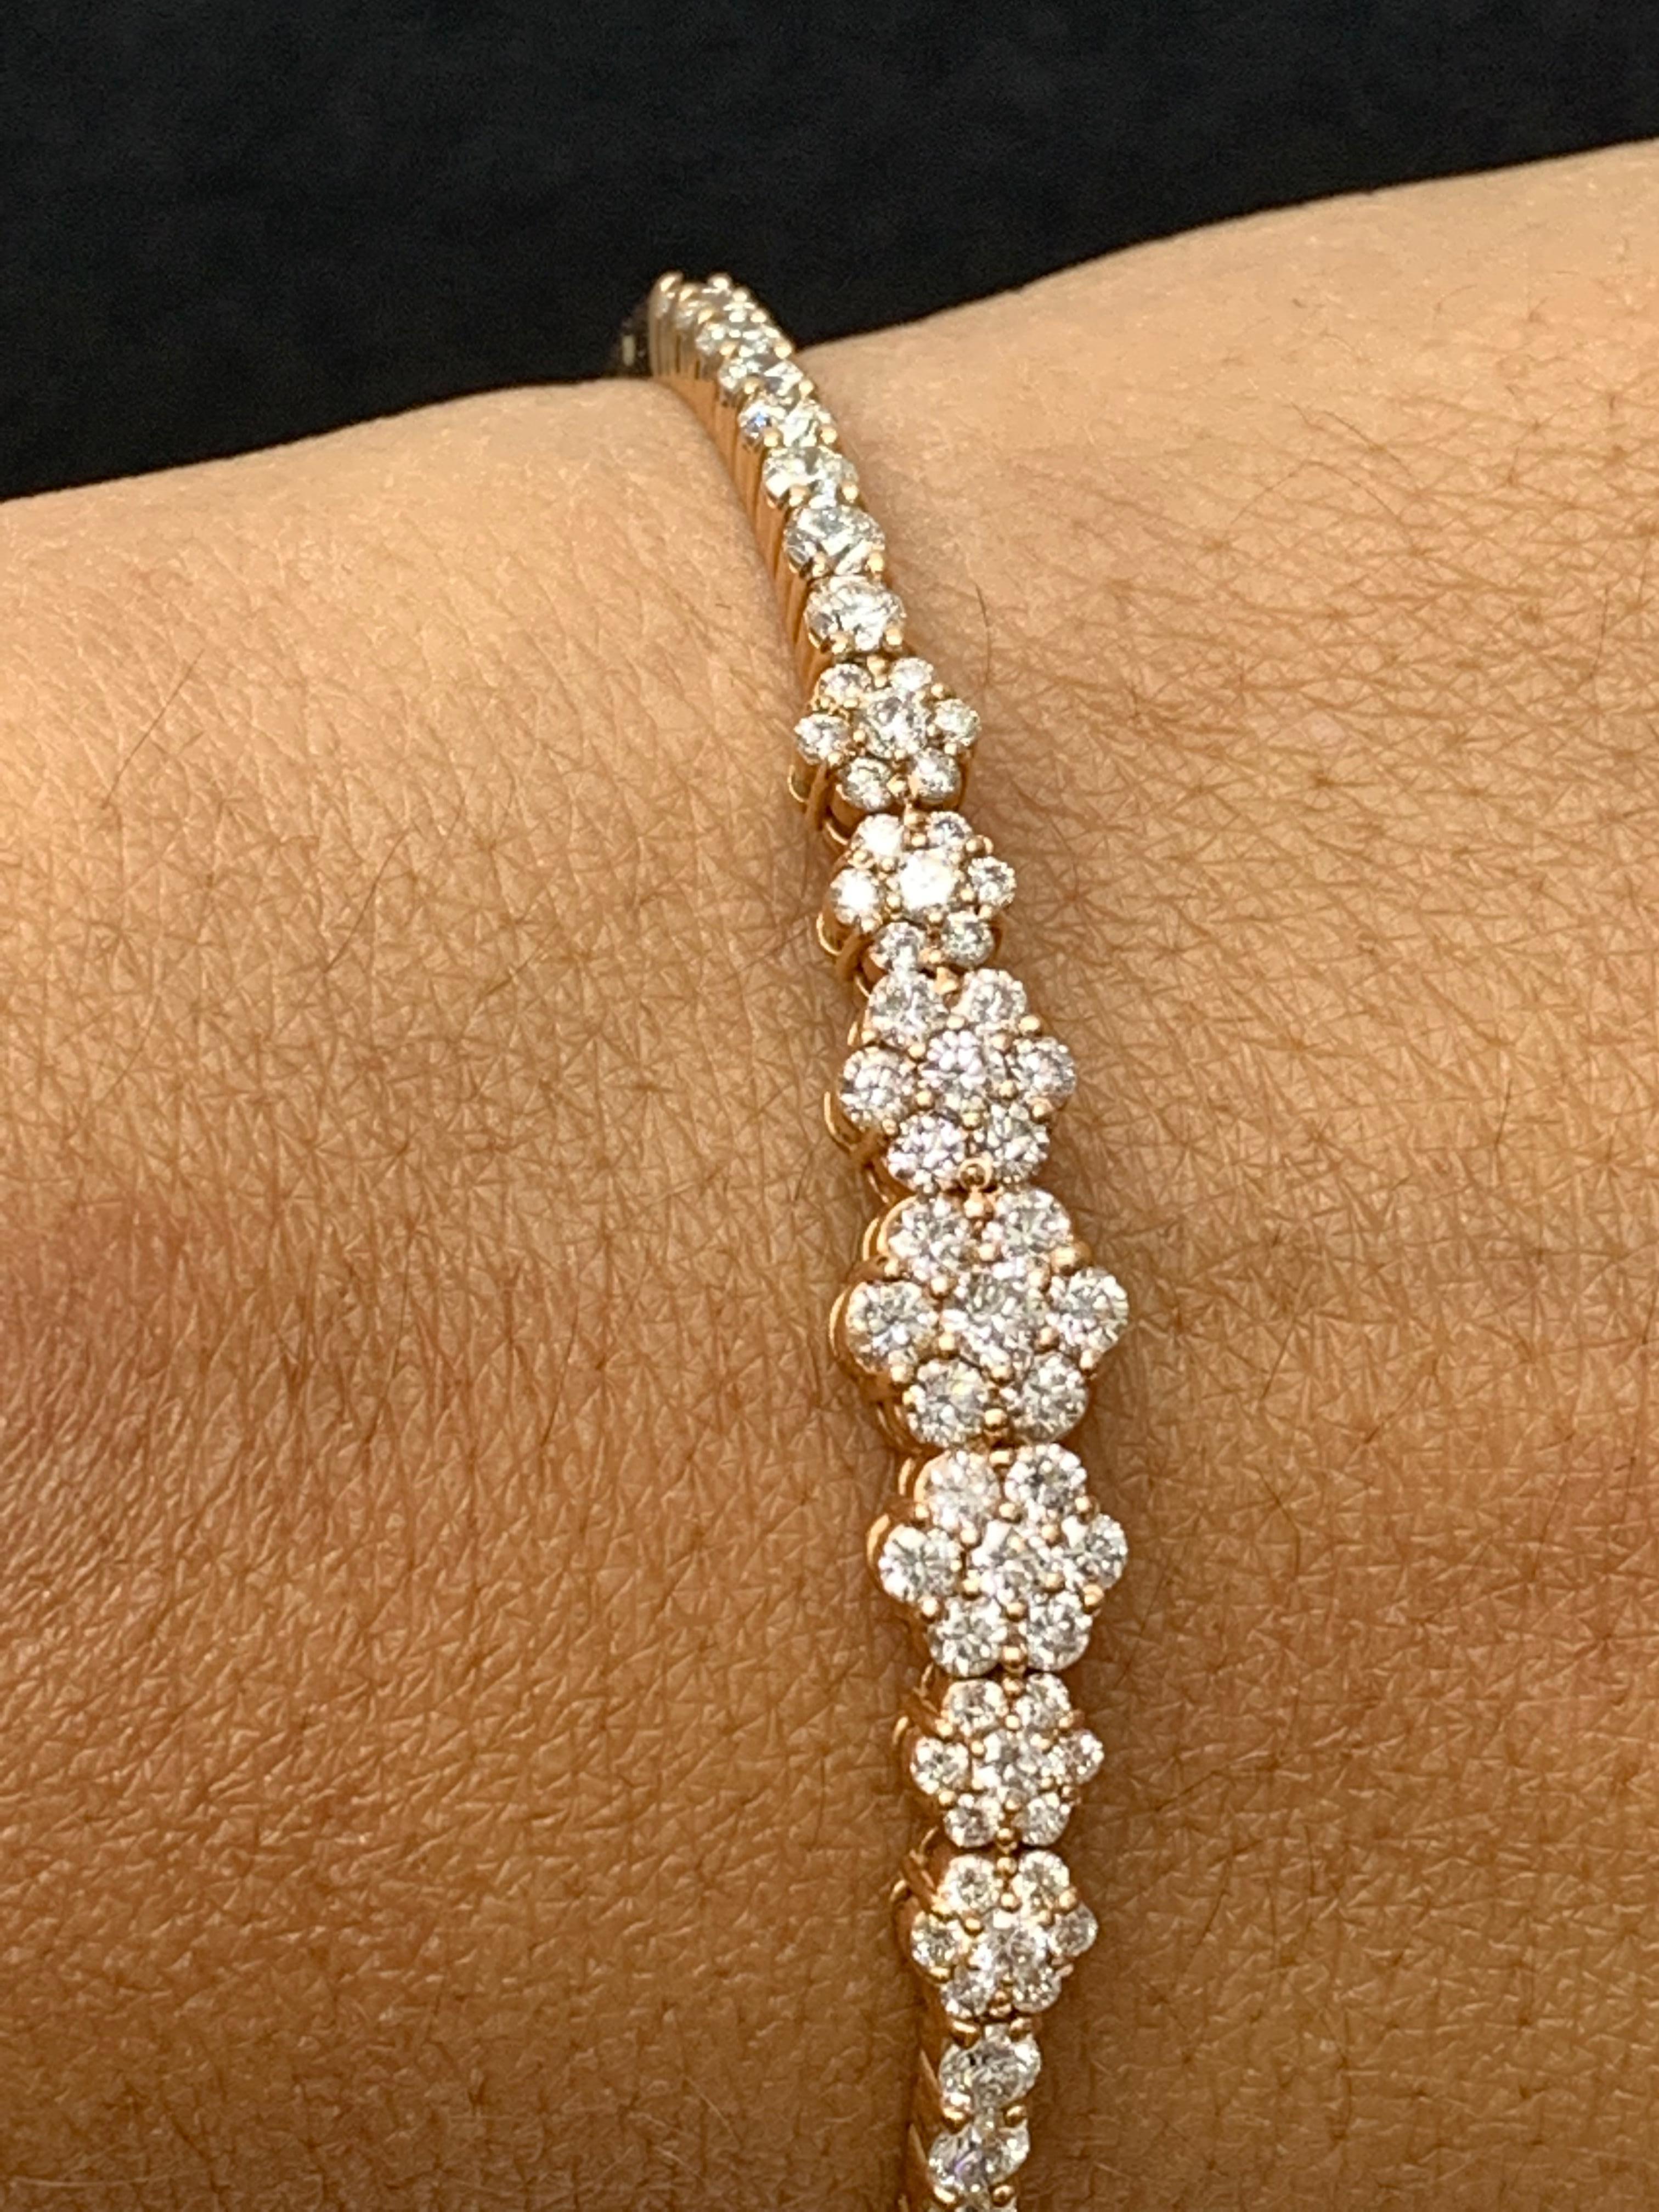 Sparkle in the spotlight with this diamond bangle bracelet. Brilliant cut Diamond flowers graduating towards the center weigh 2.54 carat in total. Set in an 14k rose gold basket. A hinged design bracelet for easy wear and removal. 

All diamonds are